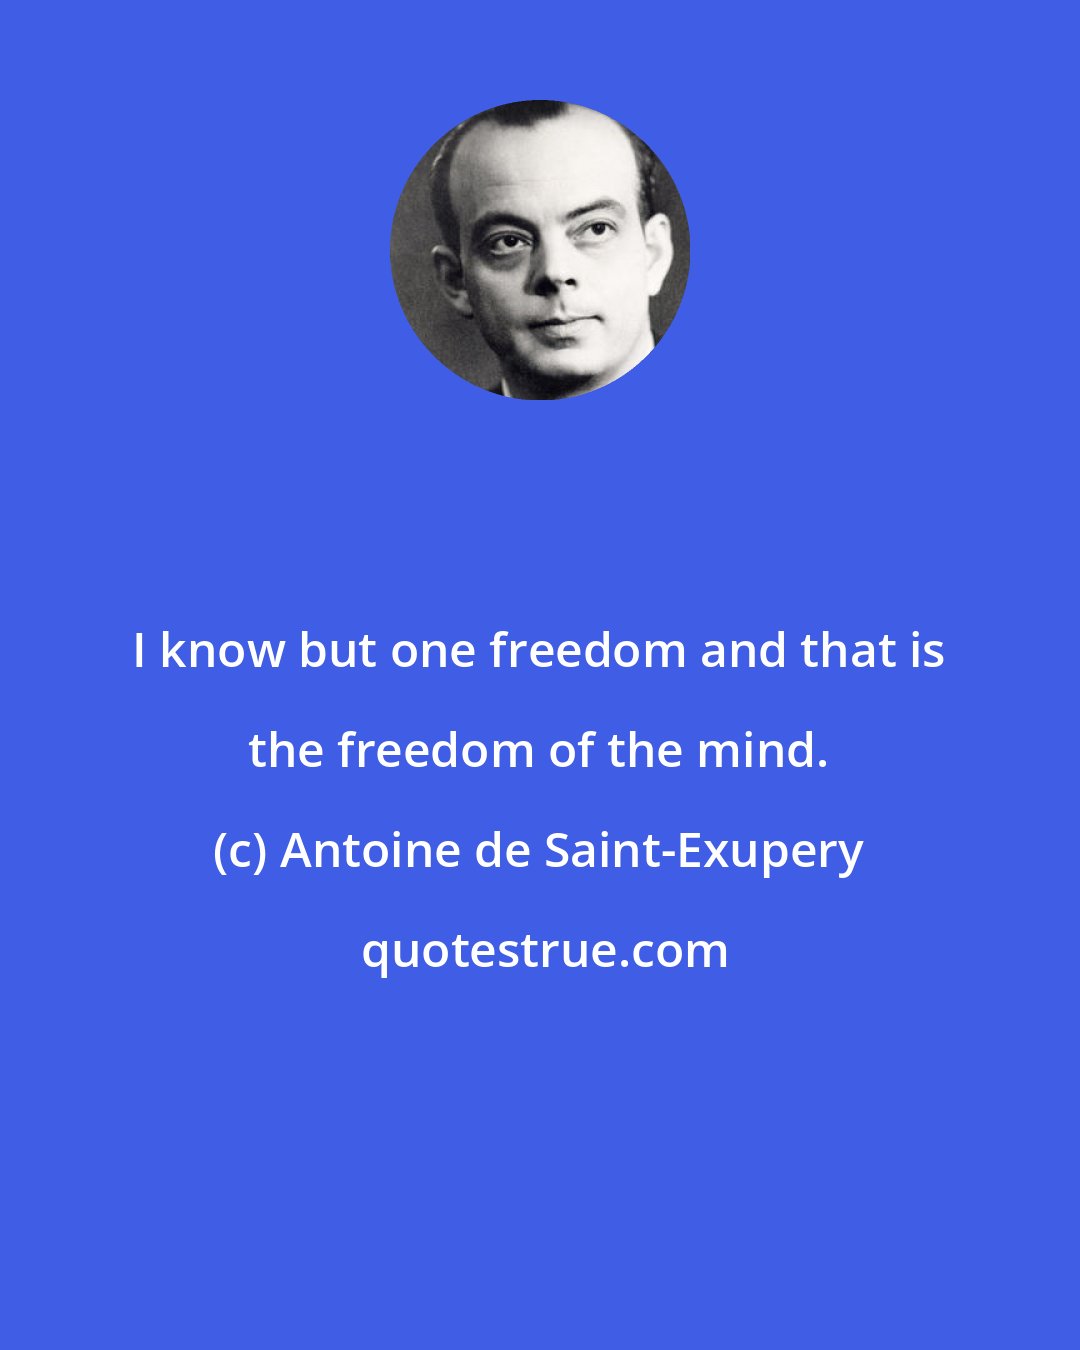 Antoine de Saint-Exupery: I know but one freedom and that is the freedom of the mind.